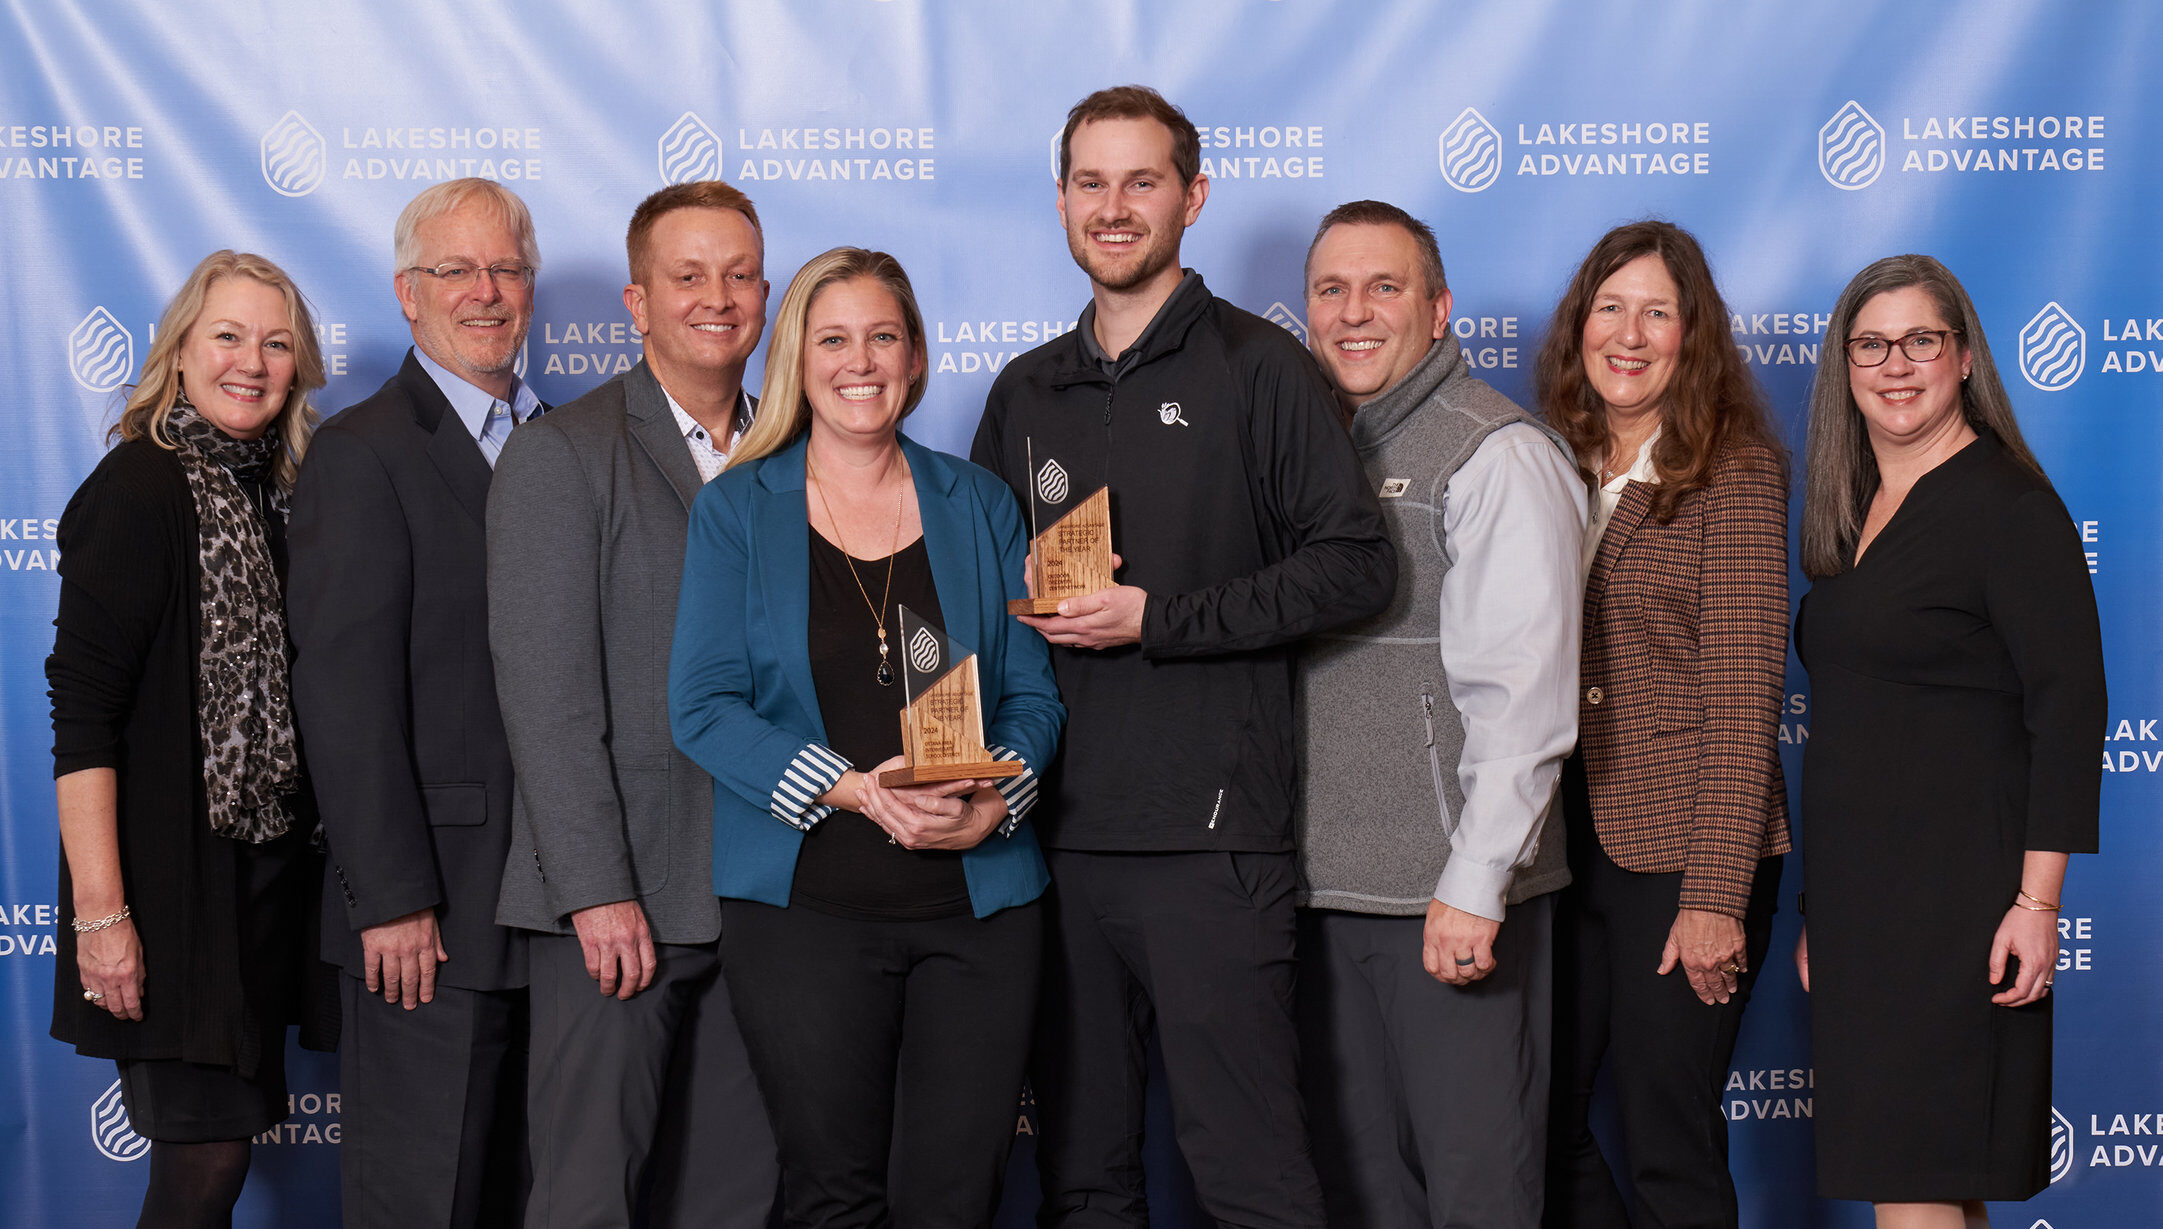 Ottawa Area Intermediate School District and Outdoor Discovery Center Network Receive Lakeshore Advantage Strategic Partner of the Year Award